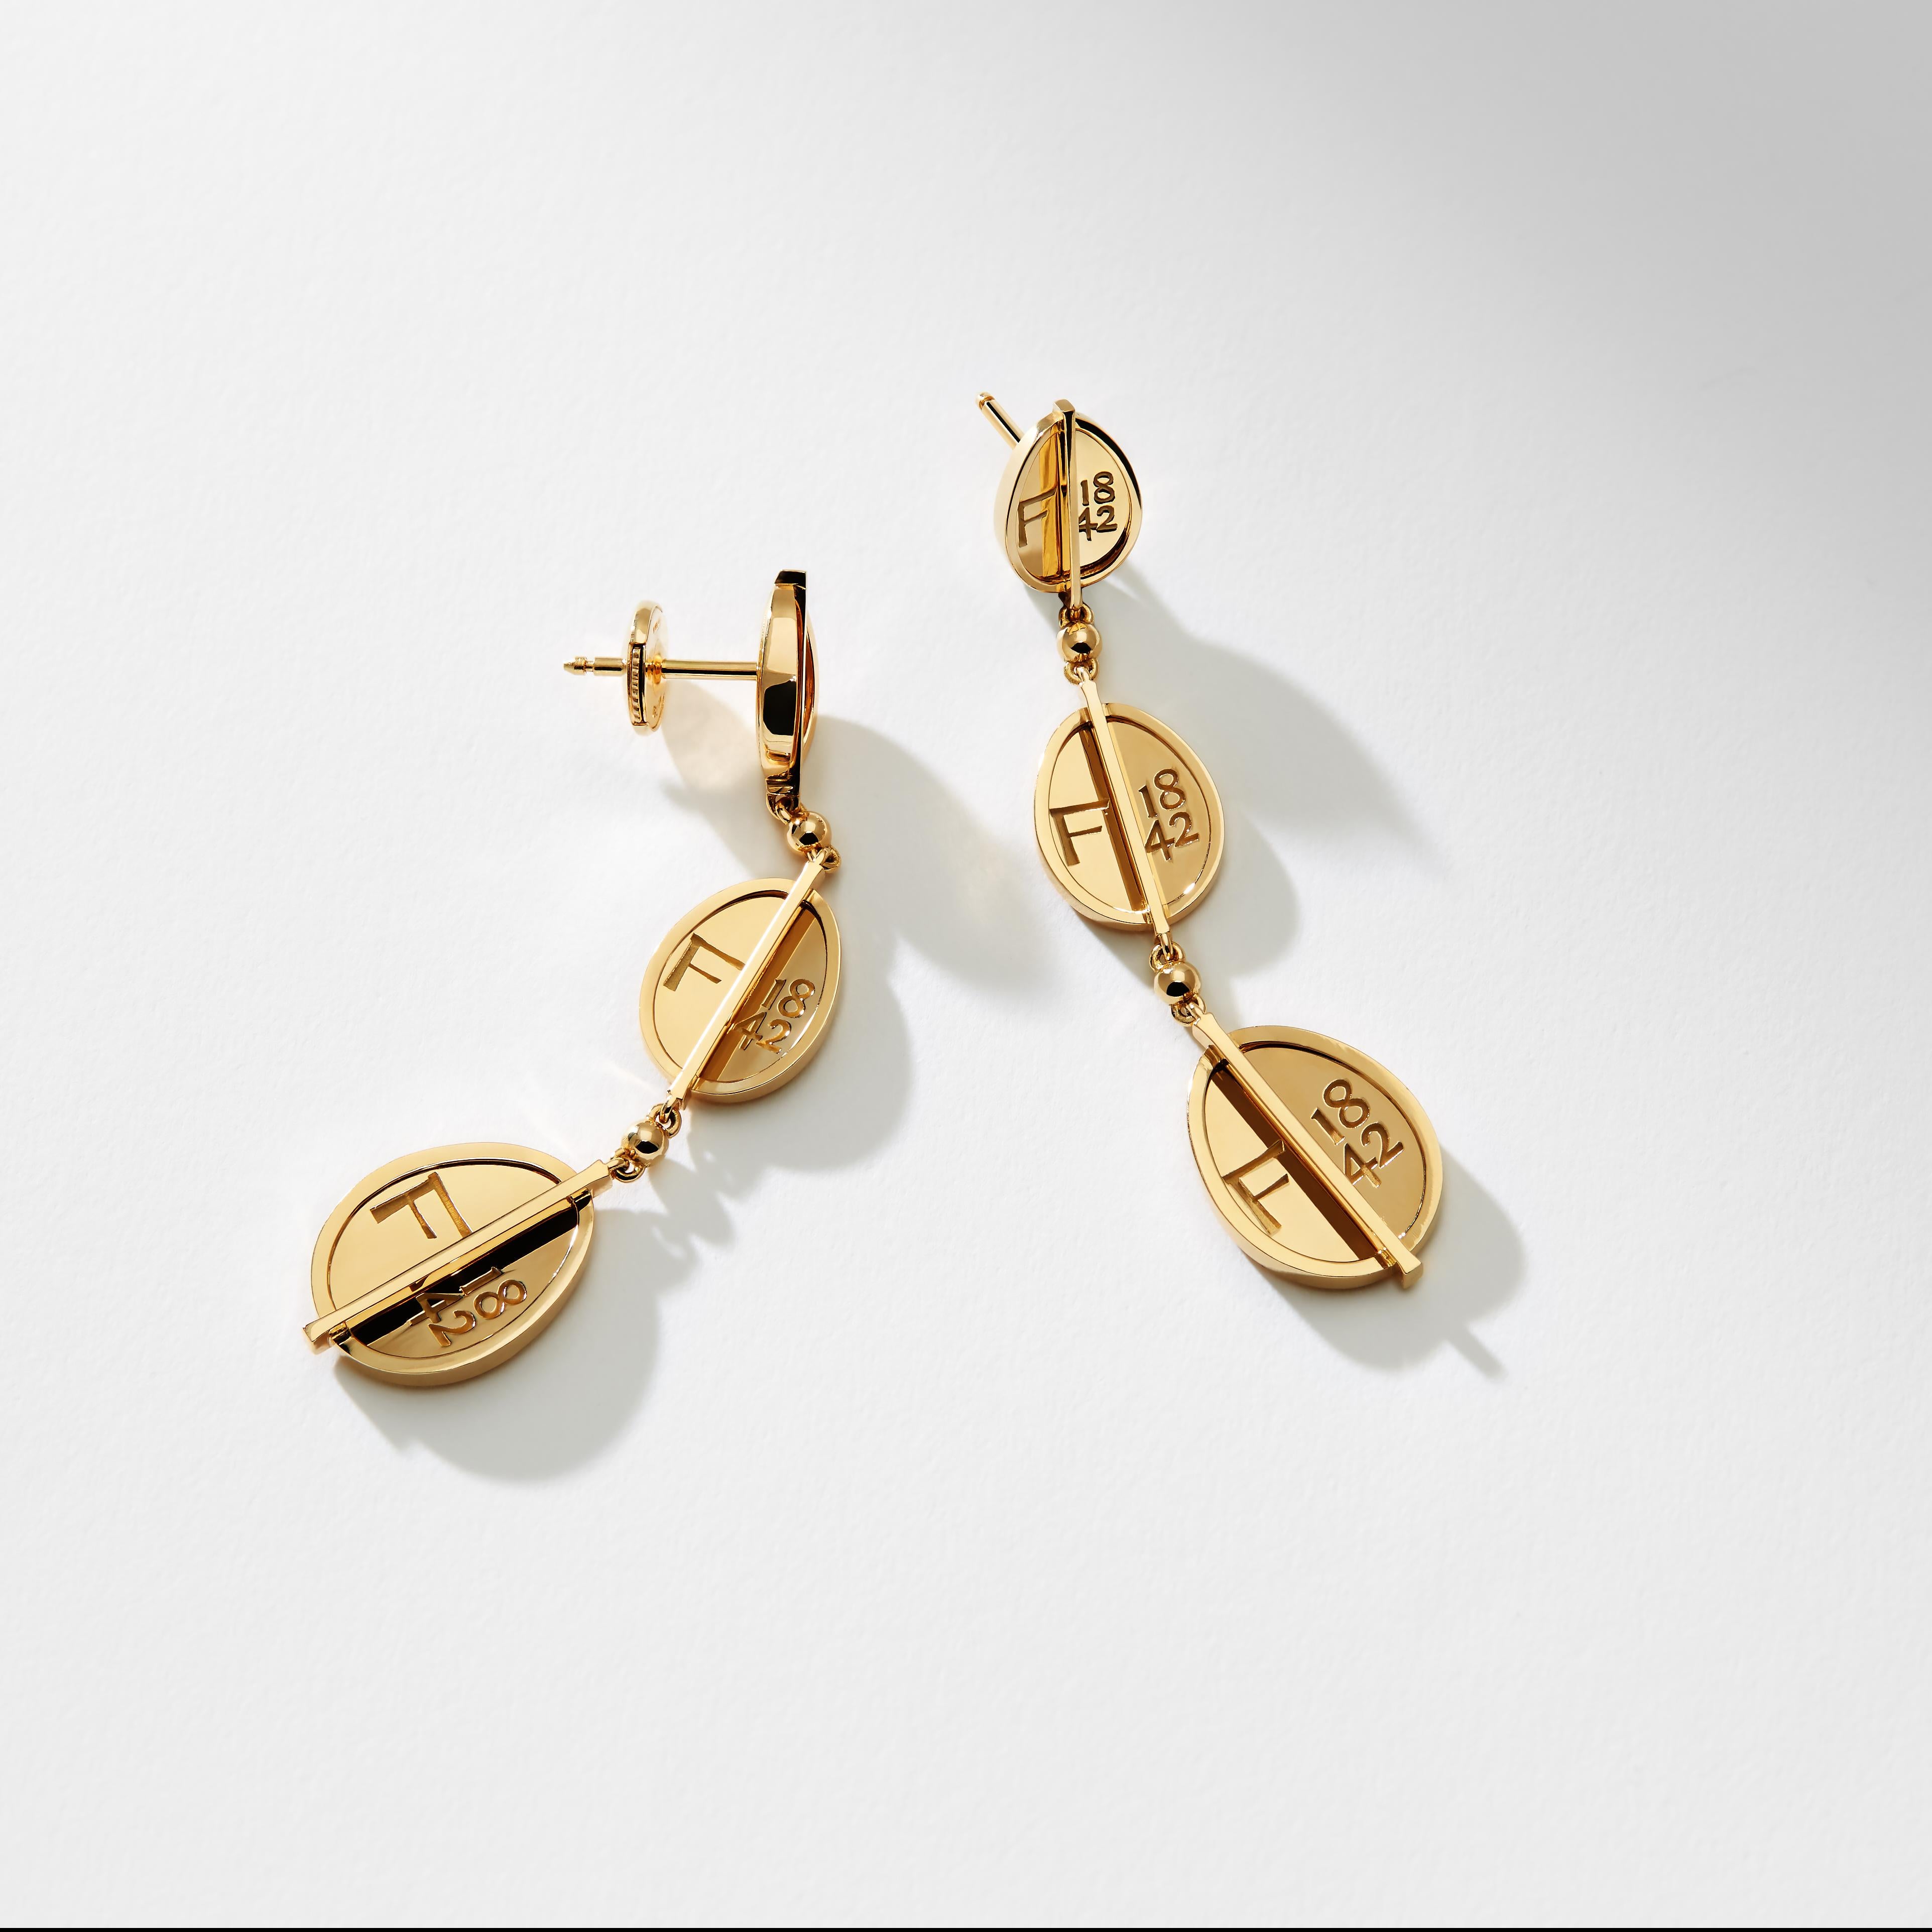 The Fabergé 1842 Yellow Gold Egg Drop Earrings each feature three egg shaped Fabergé hallmarks set in 18 karat yellow gold. The earrings are 55mm in length, 12mm at the widest point and 2.5mm in depth. In keeping with Fabergé’s penchant for